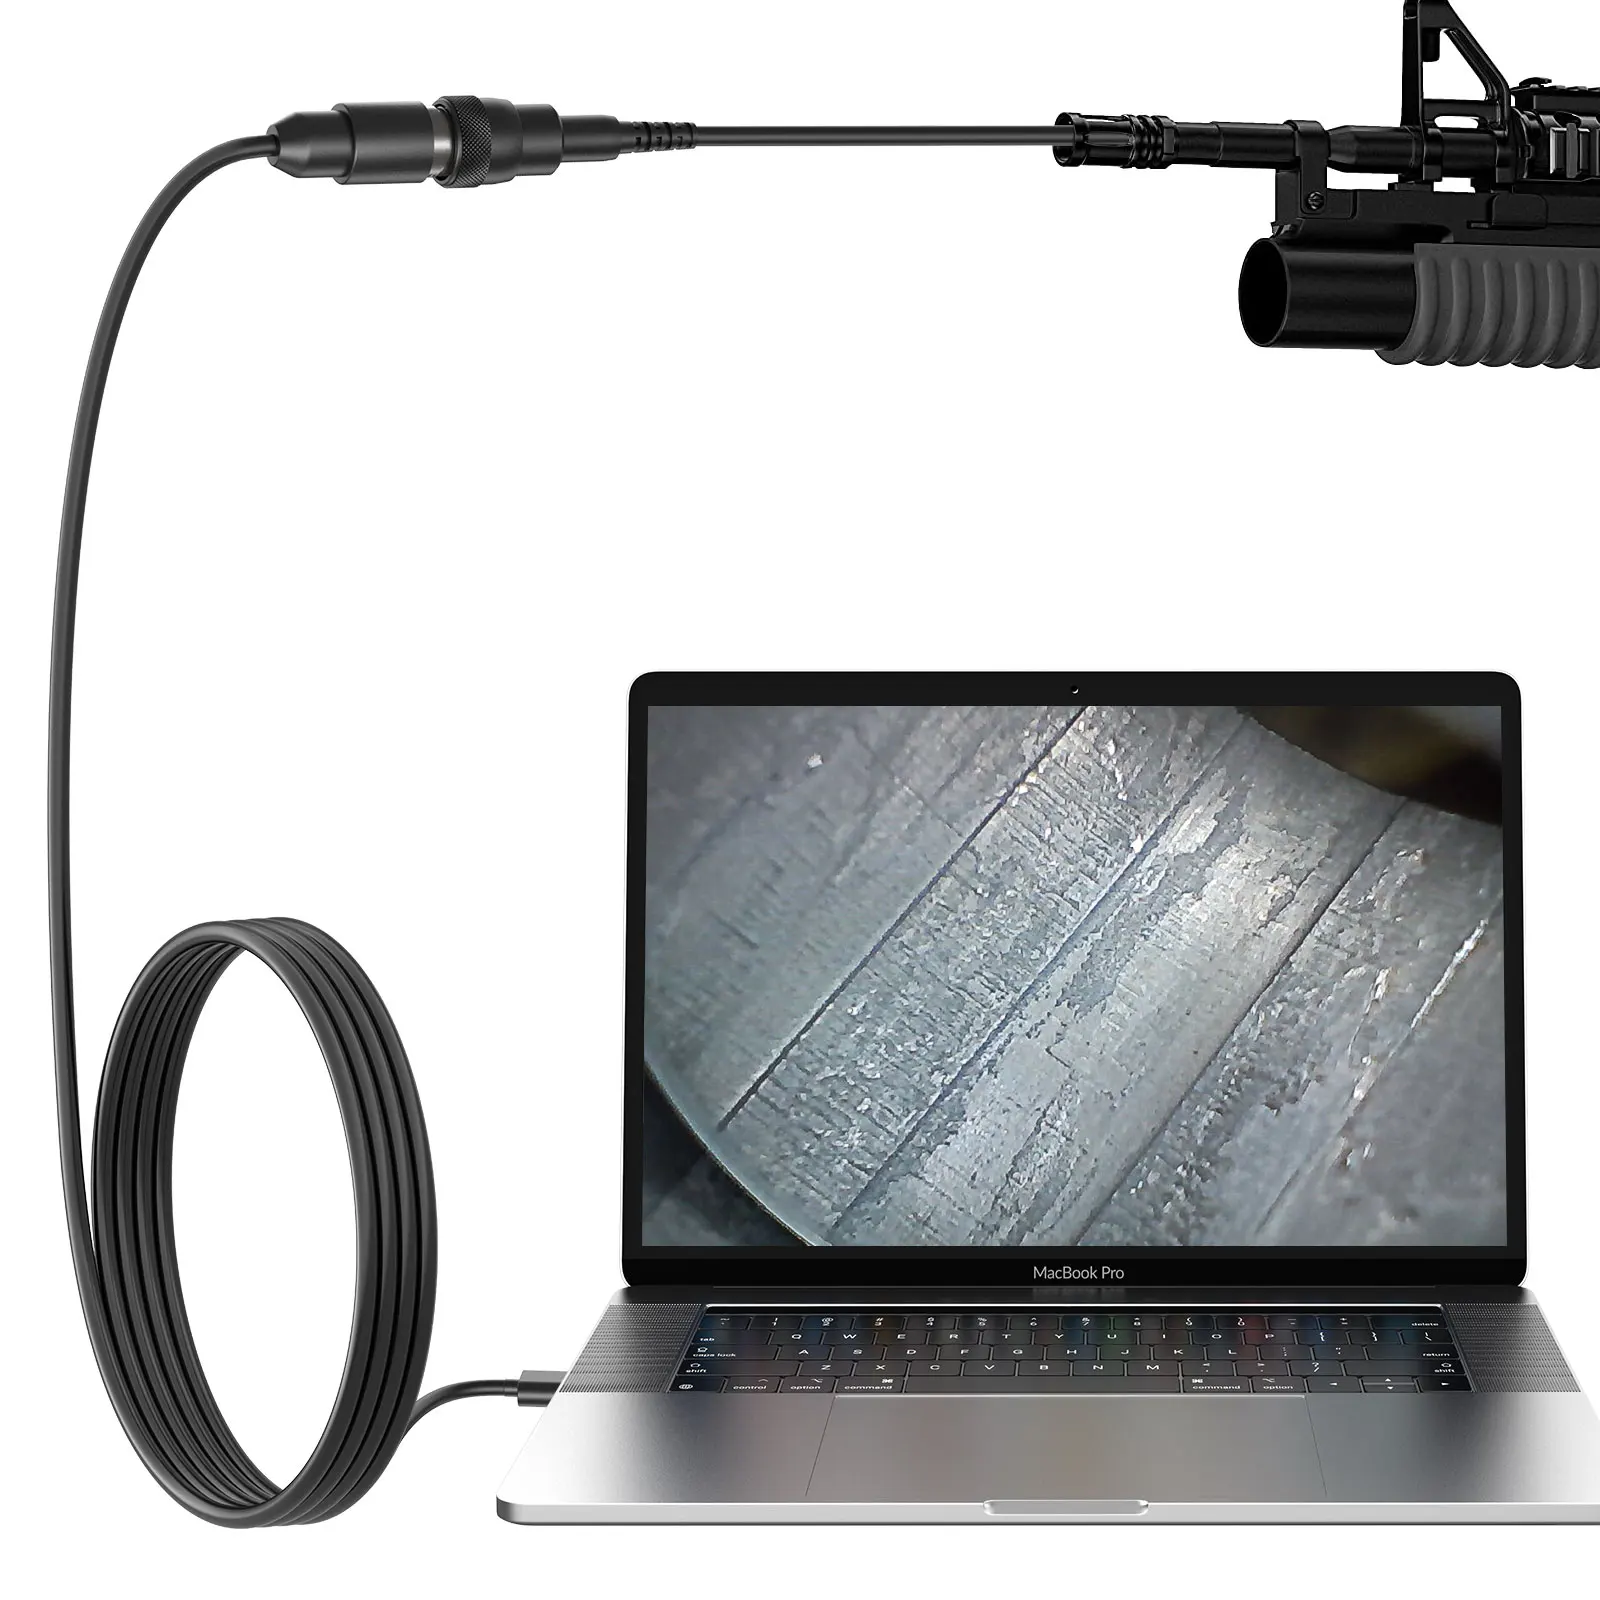 

Teslong Rifle Borescope Camera, 0.2inch Digital Cleaning Bore Scope with LED Light & Side Mirror, Fits .20 Caliber and Larger